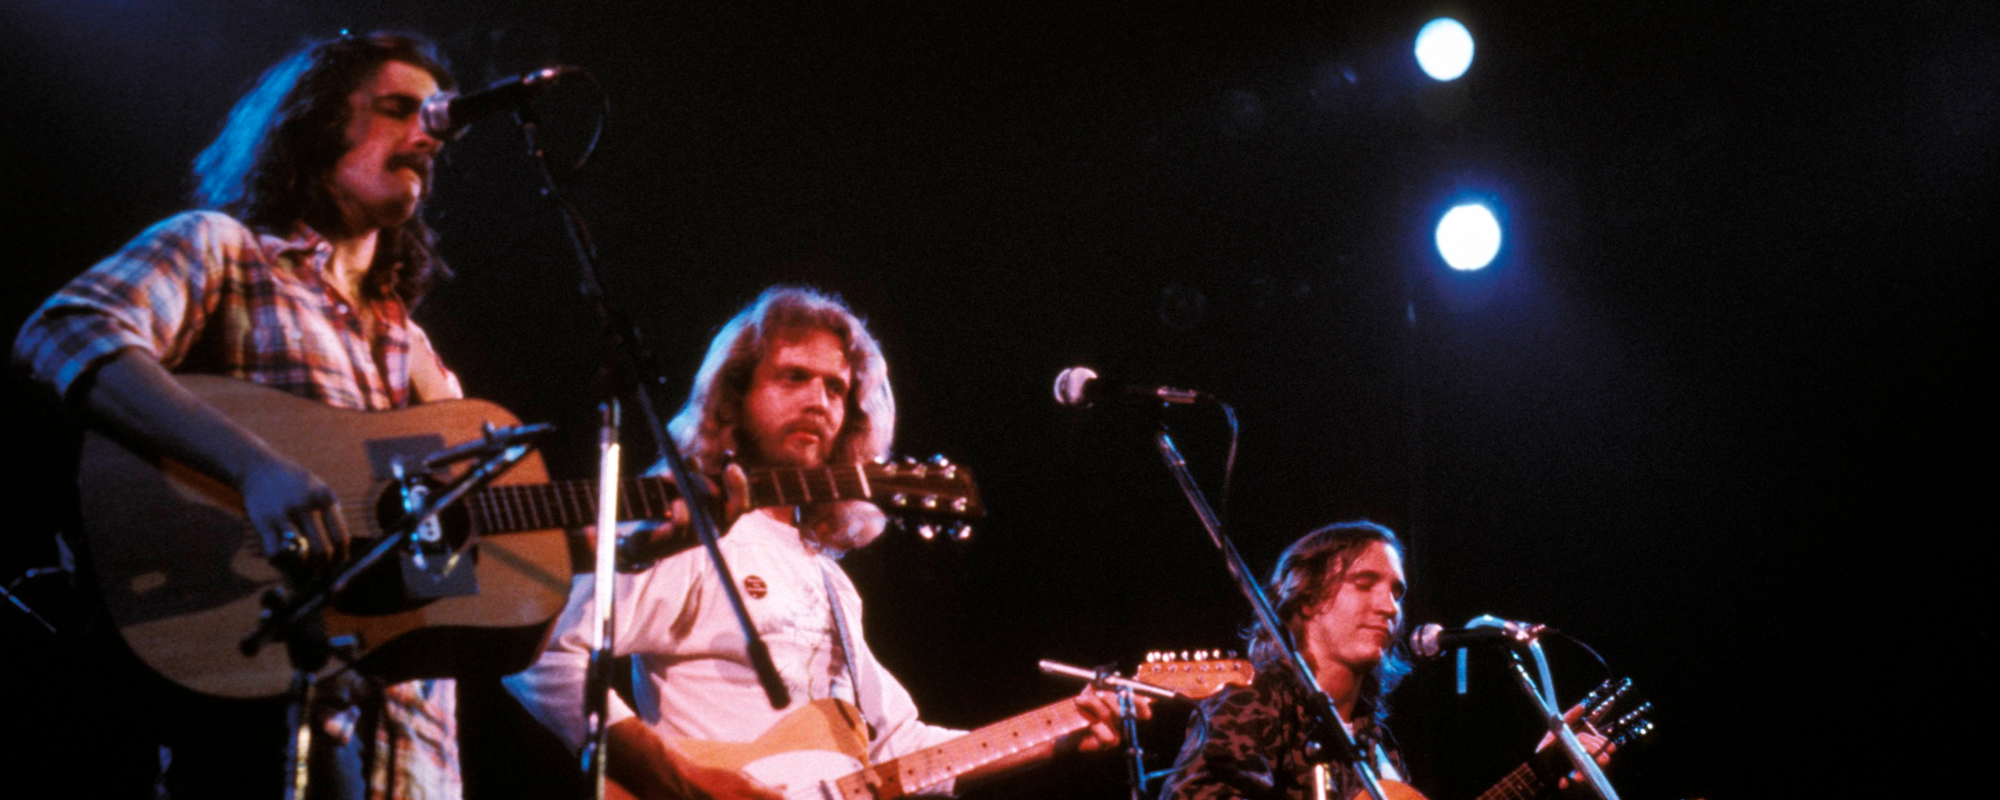 All Songs on Eagles Album ‘Hotel California’ Ranked